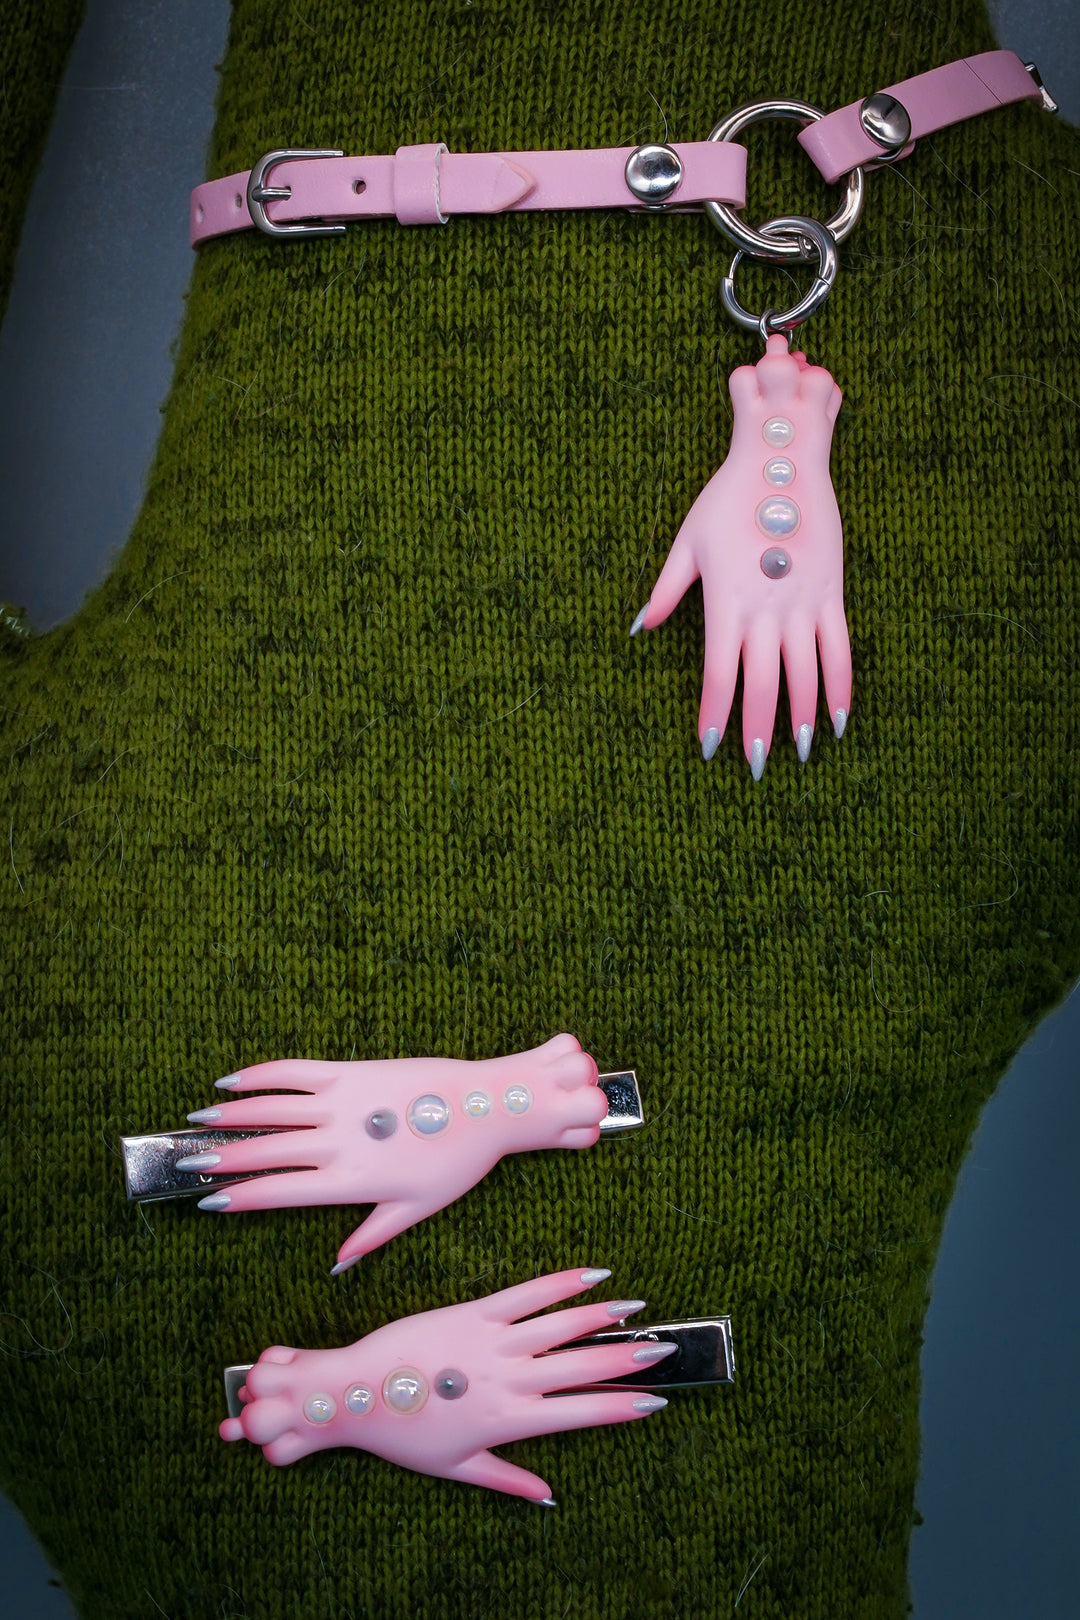 Pink Fairy Goblin Hands Jewelry Set, Whimsical Goblin Hands Earring, Necklace & Hairclips, Enchanting Pink Fairy Accessories Ensemble, Fantasy Hands Pendant in Vibrant Pink, Cute Goblin Hands Earring and Necklace Set, Quirky Pink Fairy Necklace and Hairclip Collection, Fairy Tale Inspired Jewelry Trio, Unique Goblin Hands Hairclips with Pink Accents, Whimsical Pink Fantasy Jewelry, Hand-shaped Pendant, Hairclips & Earrings Set in Pink,